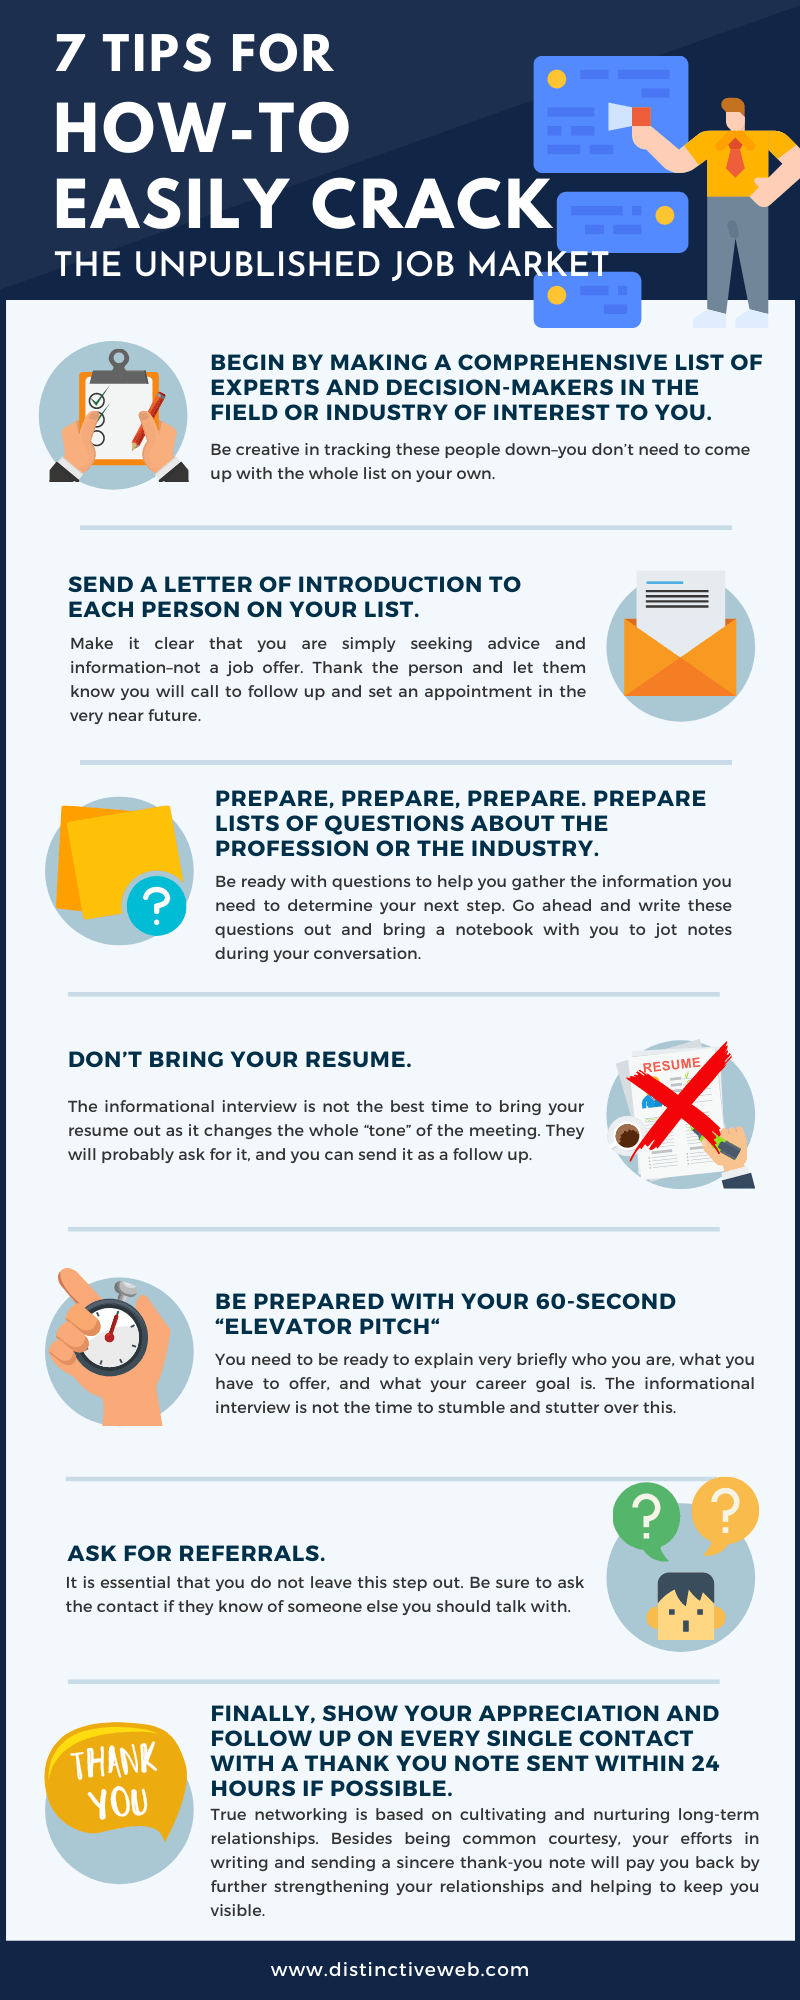 How To Easily Crack the Unpublished Job Market Infographic